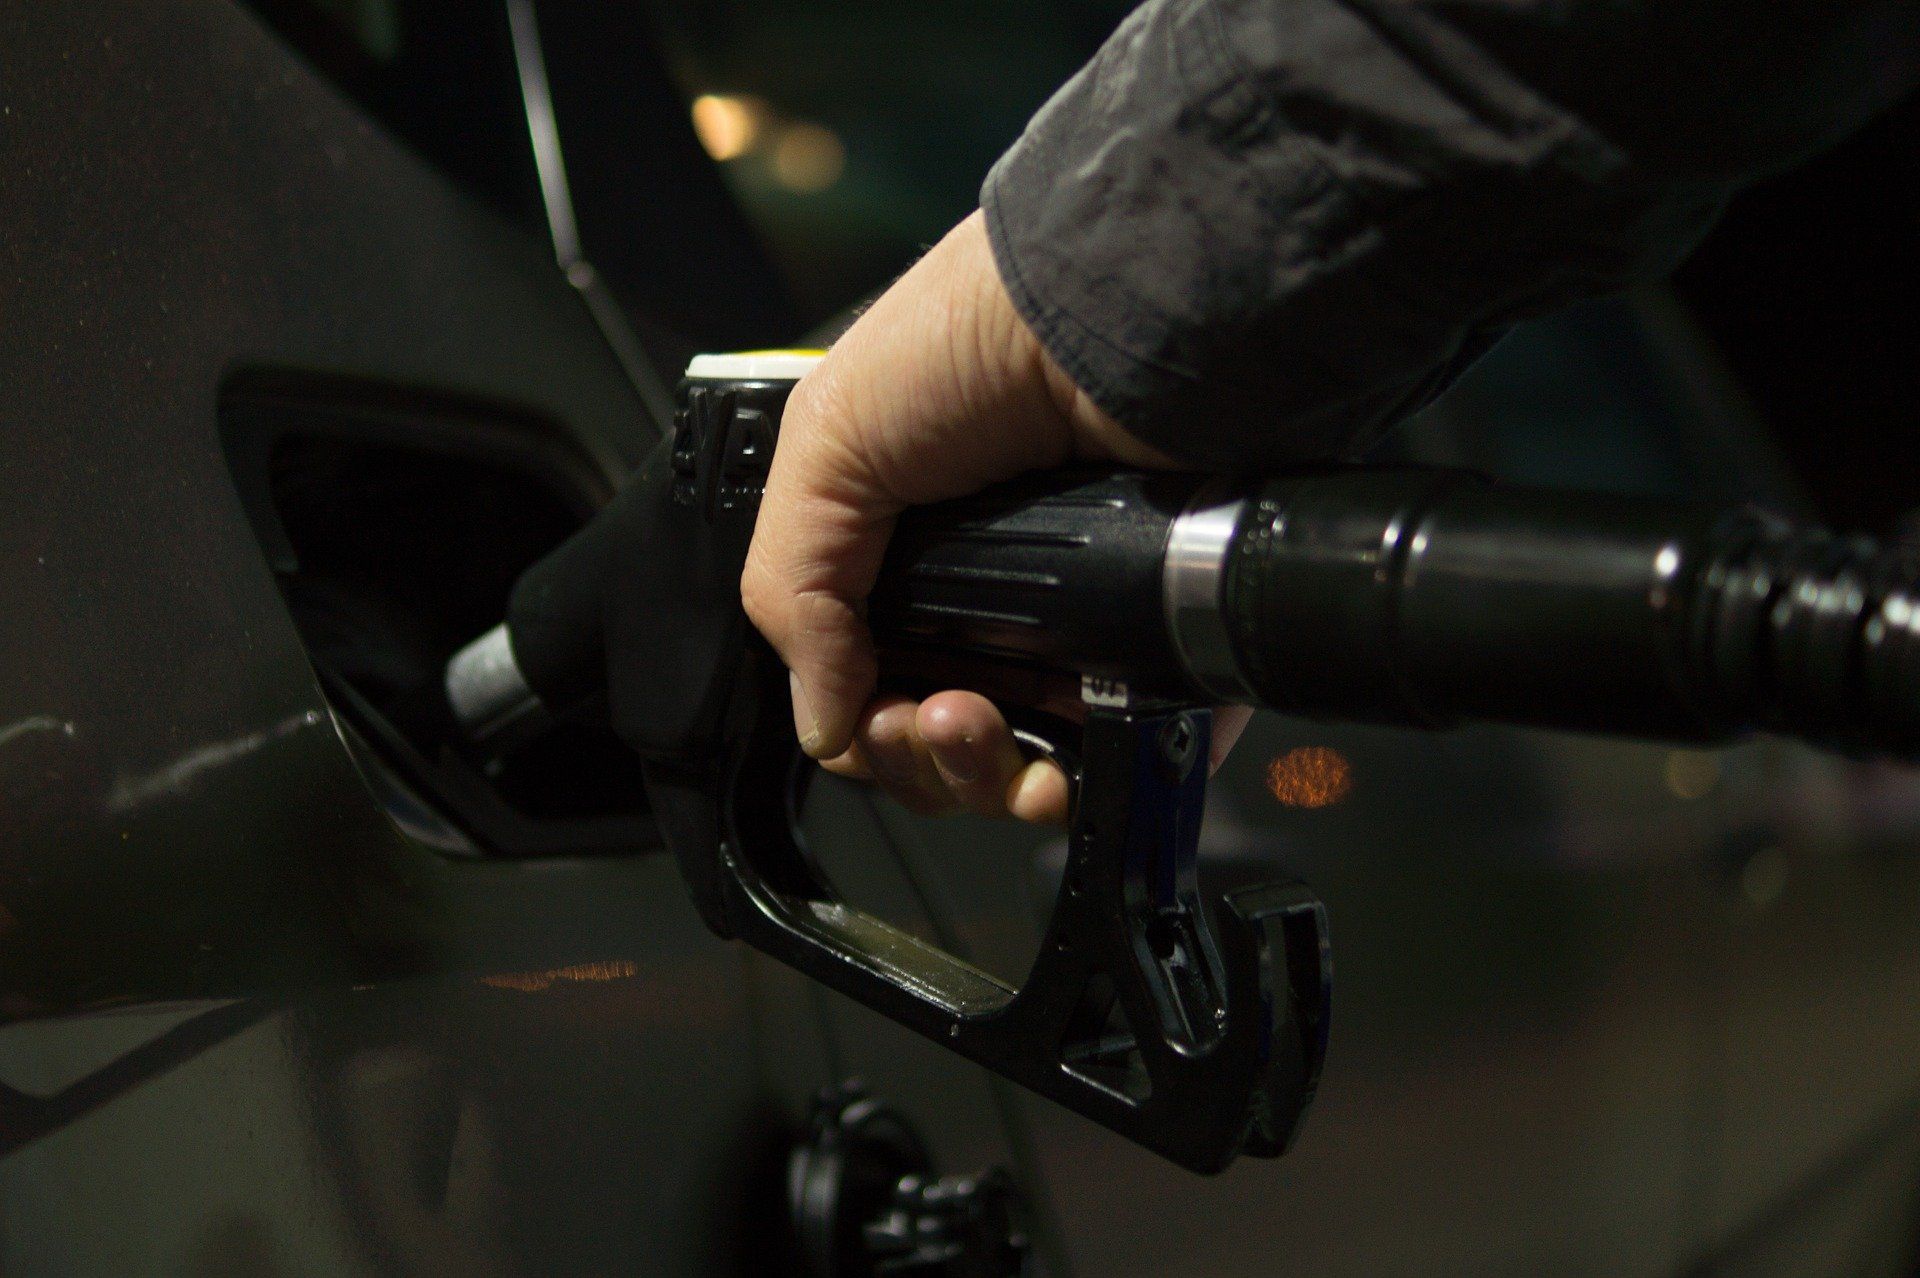 Fuel prices: Petrol priced at Rs 95.41, diesel Rs 86.67 in Delhi on March 14, 2022